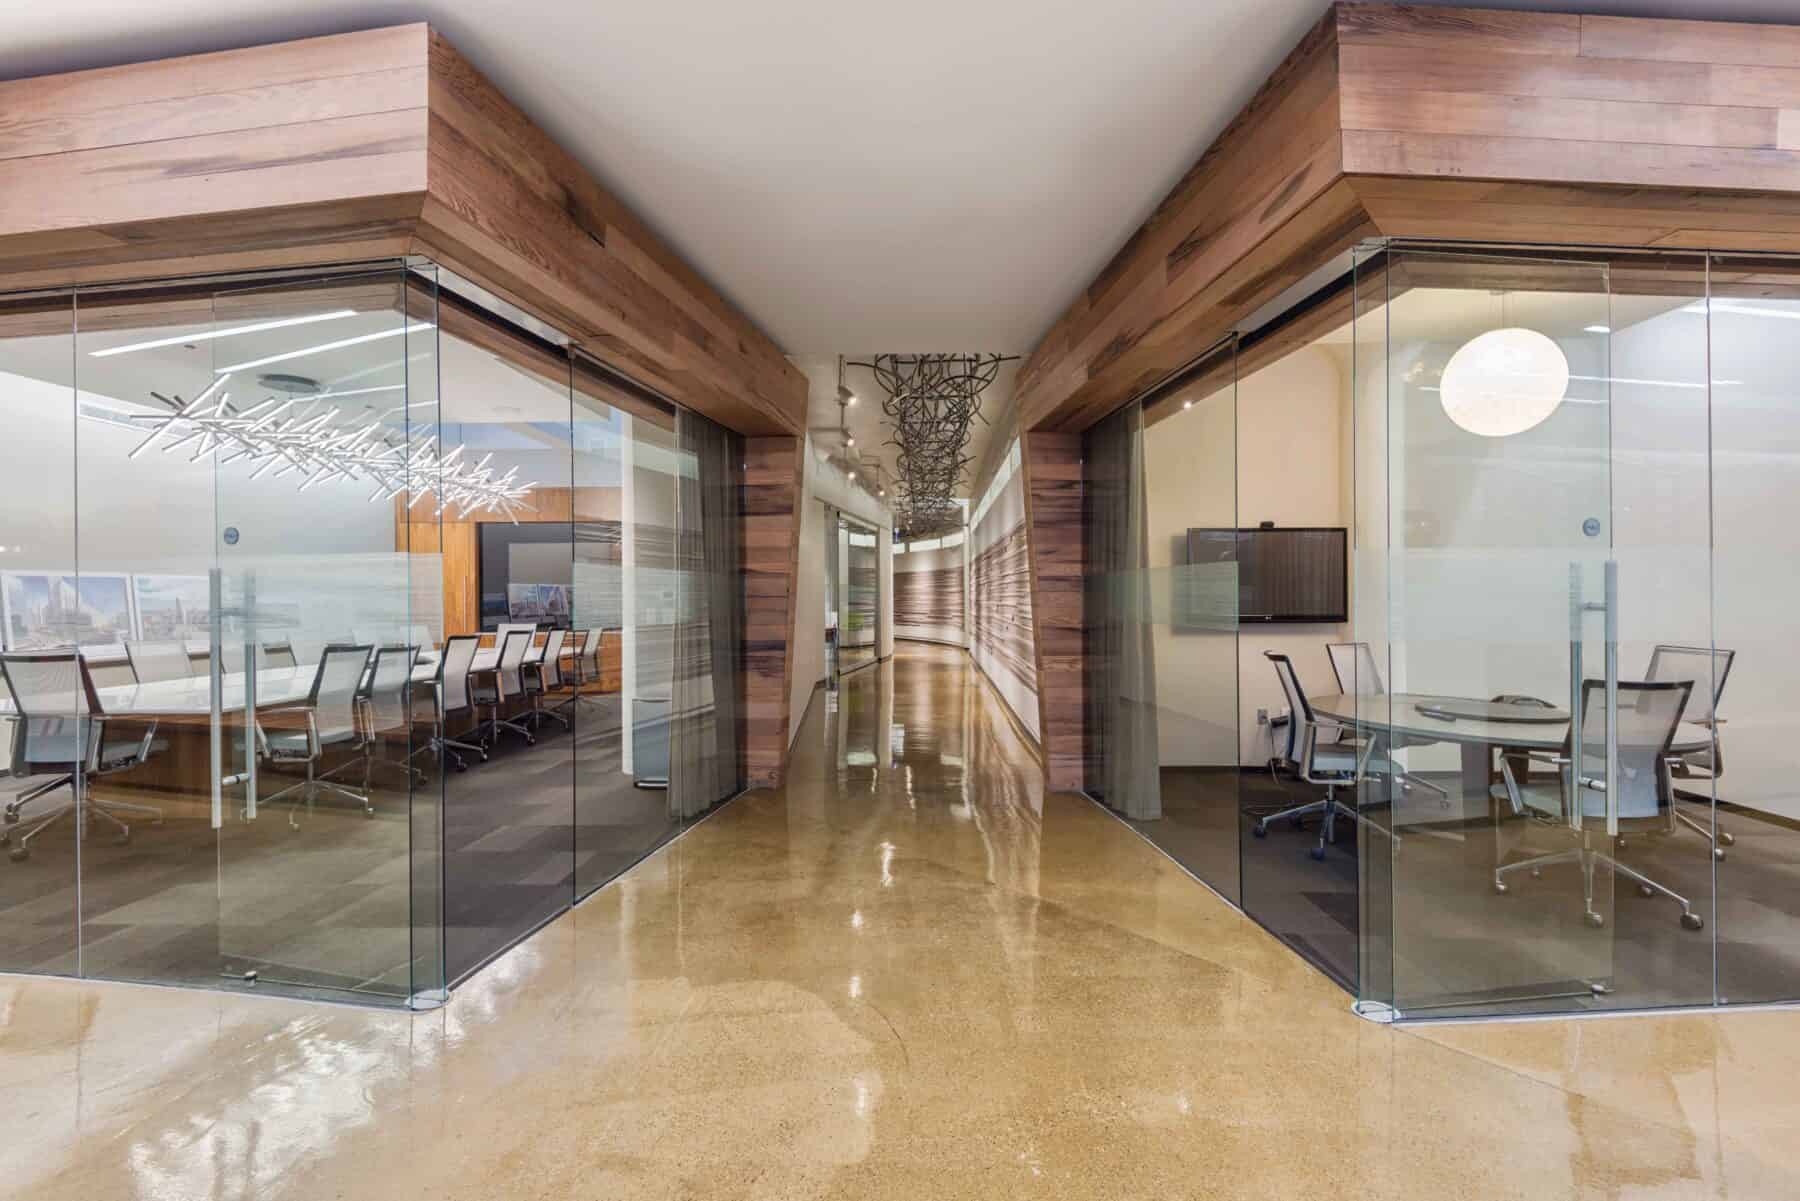 Spectacular Office Remodel with Floor to Ceiling Glass Wall and Doors with Custom Wood Work and Metal Art by Commercial Builder & General Contractor Structural Enterprises